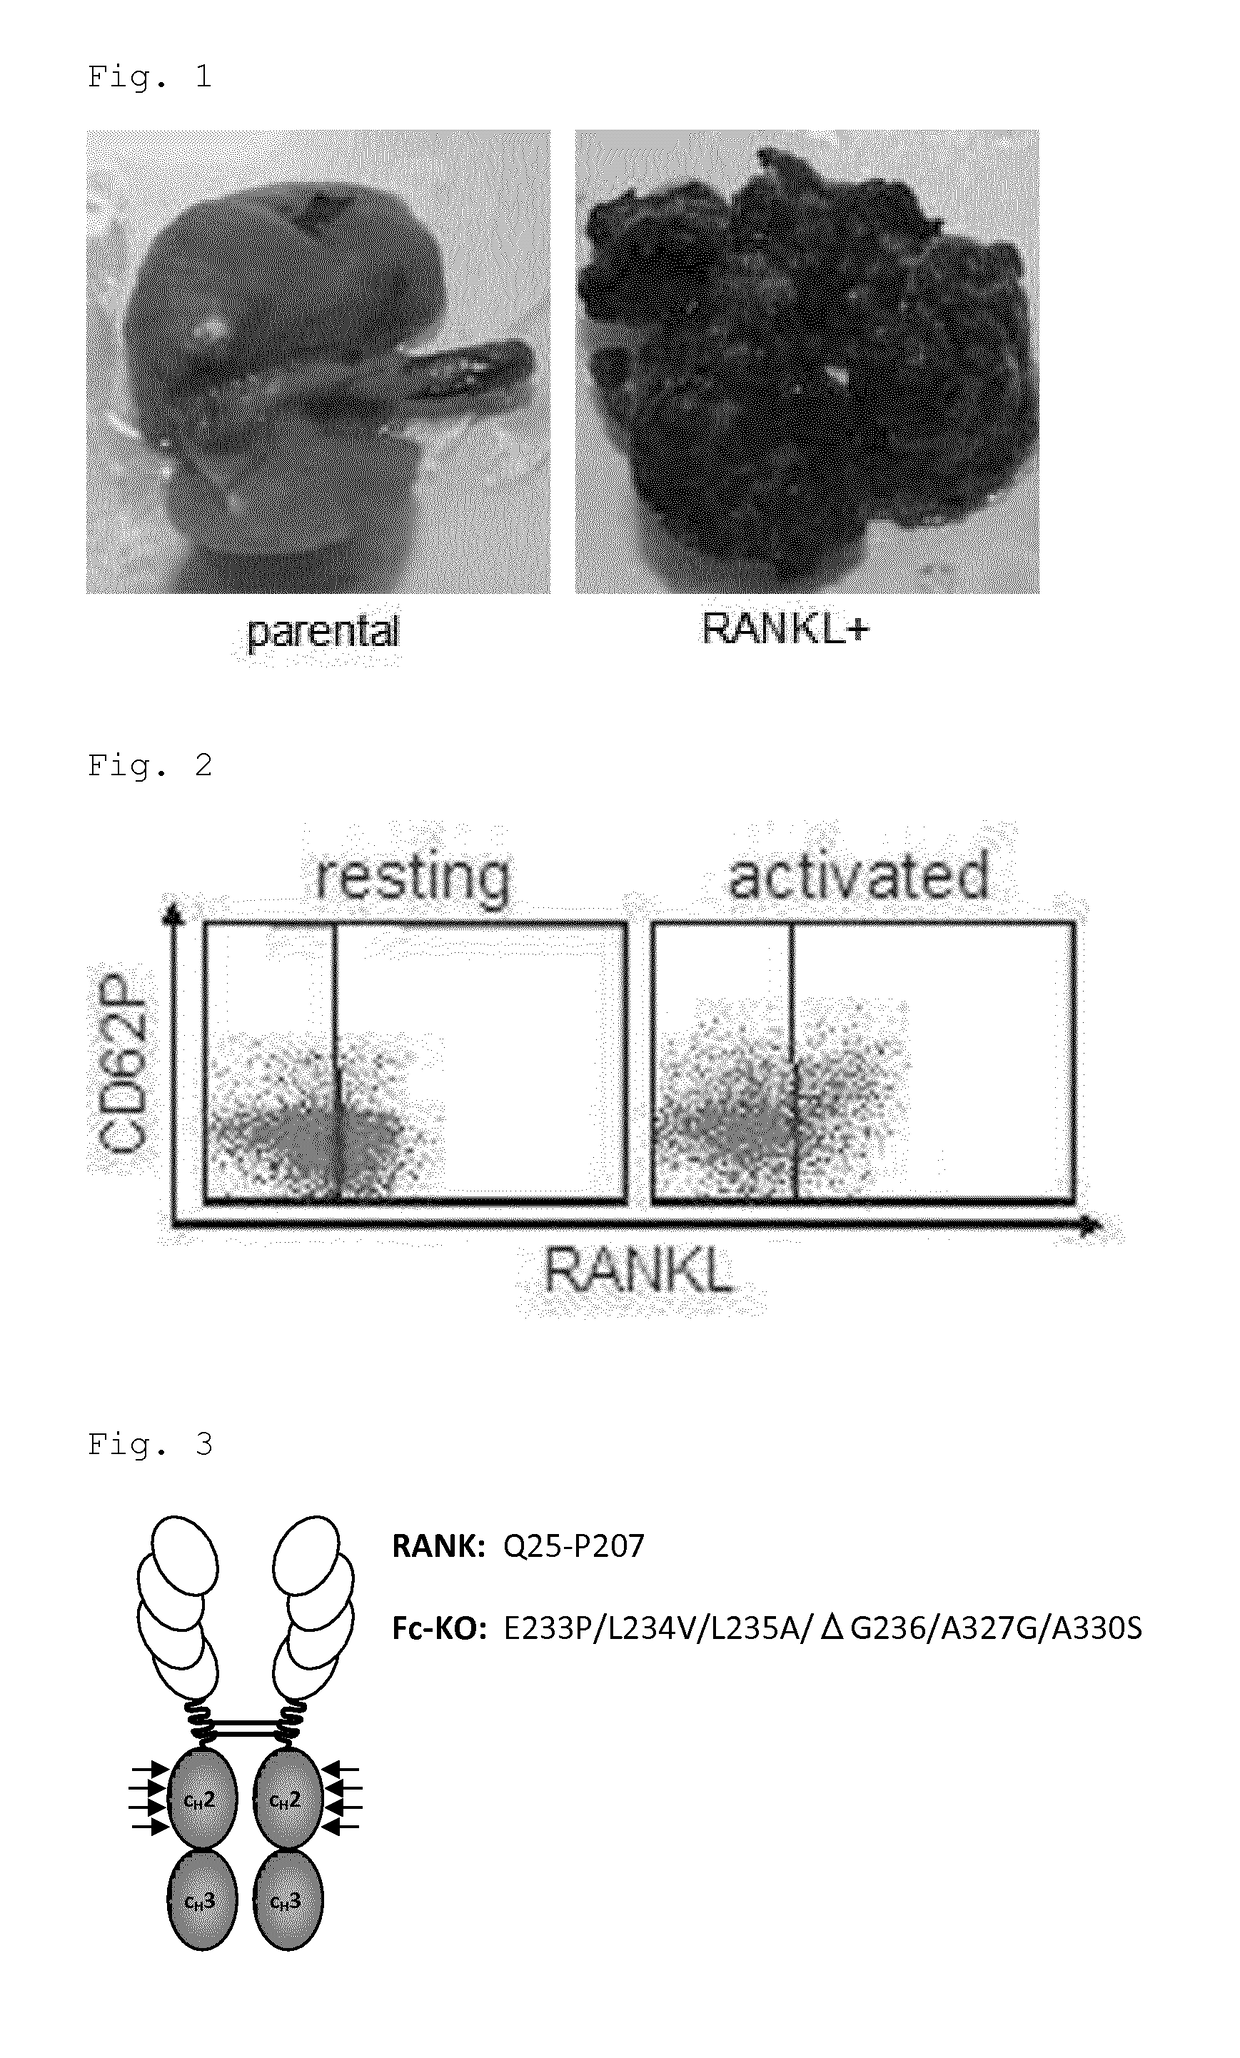 Rankl-specific agent for treating metastatic disease